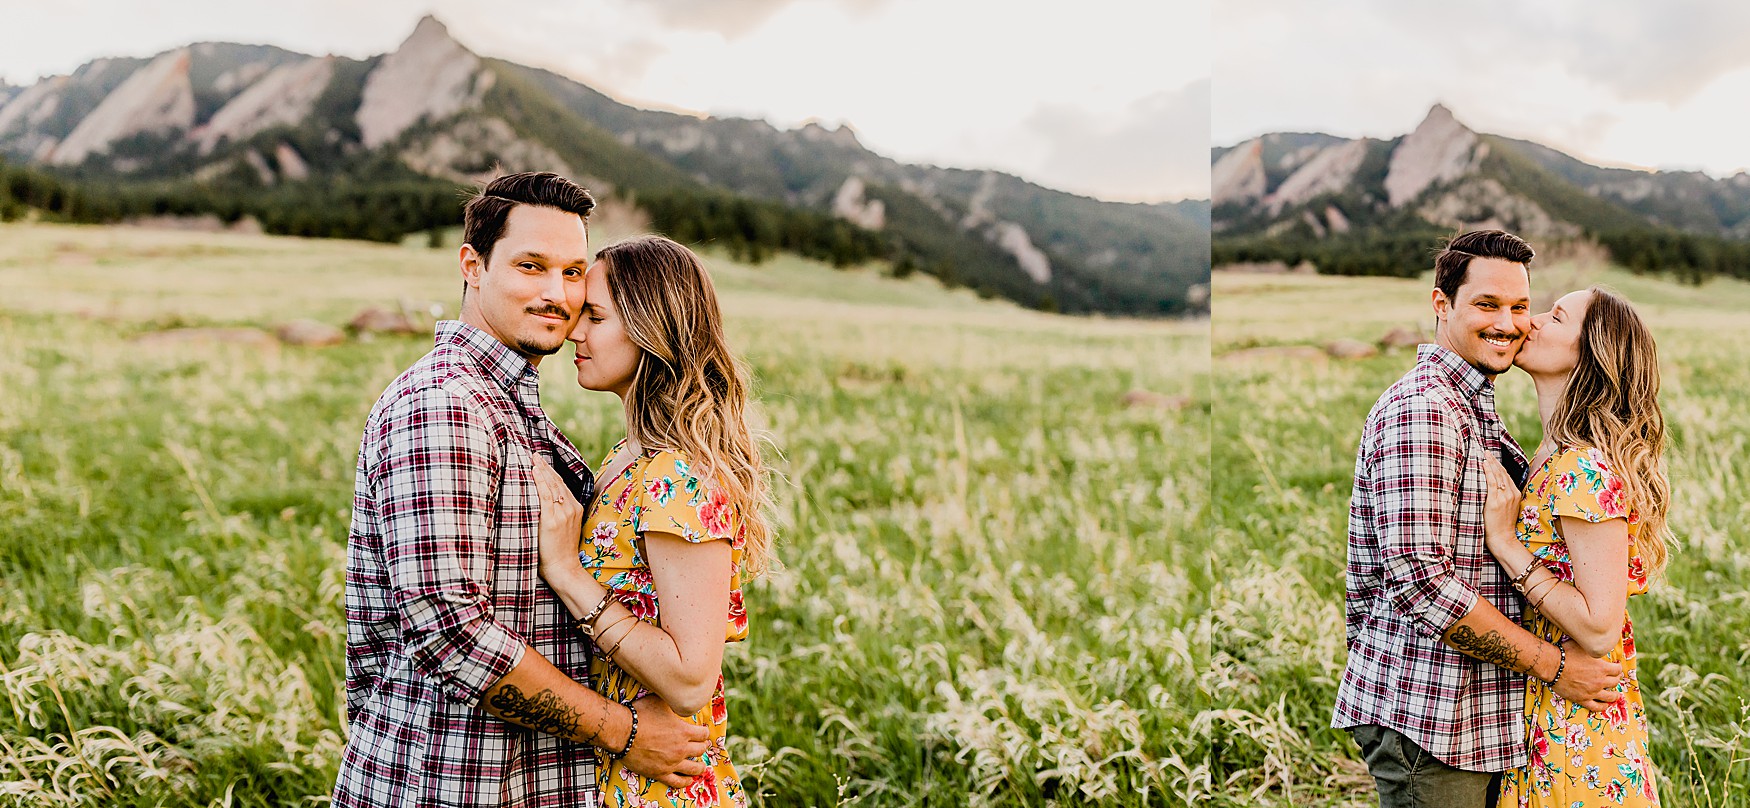 adventurous couple together at chautauqua park in boulder colorado for their mountain engagement photos including beautiful green scenery and summer wildflowers